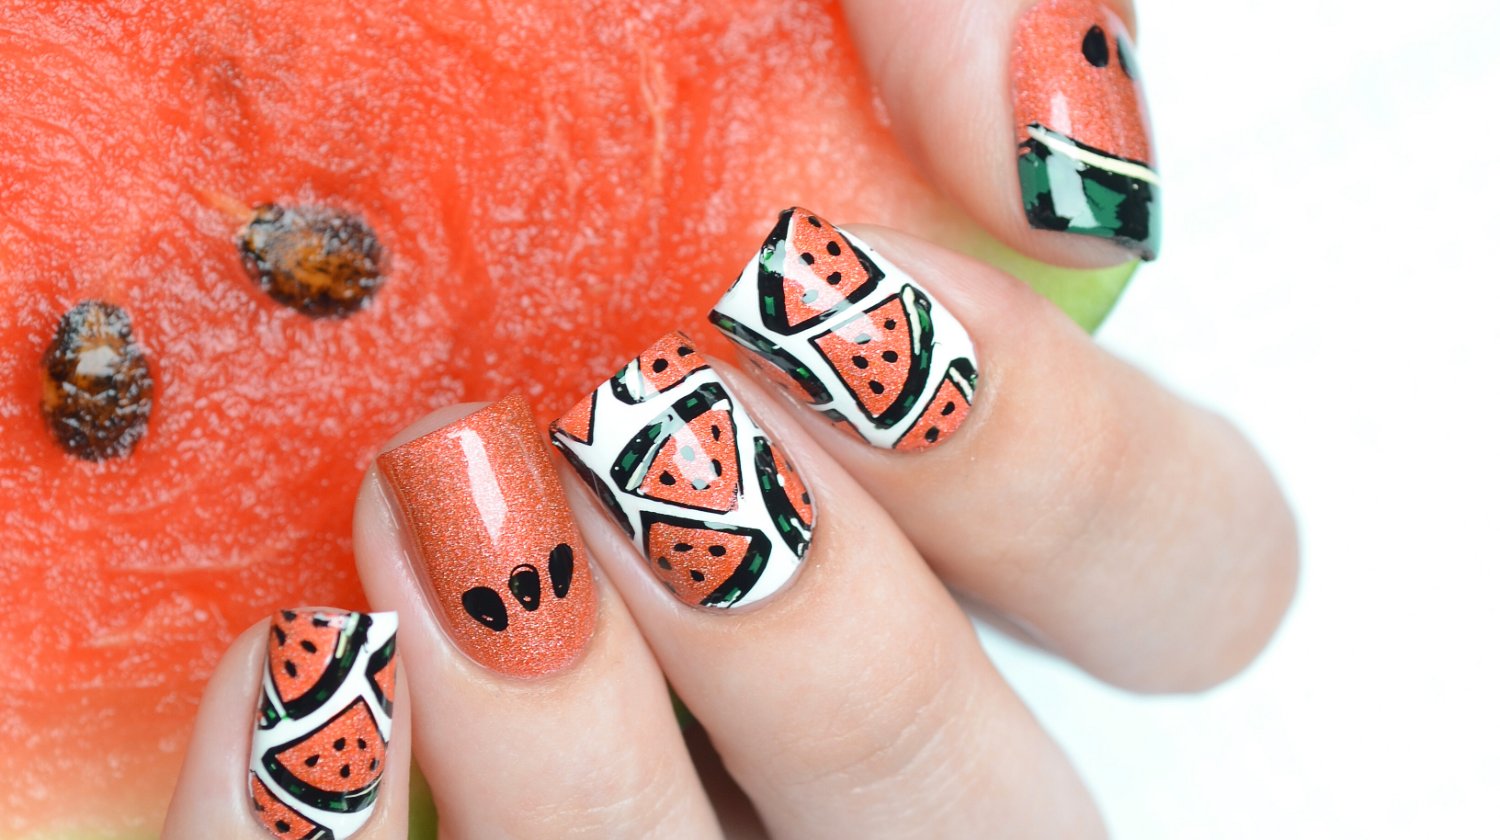 Fruit Nail Art: Watermelon Slice Tutorial Perfect For Summer